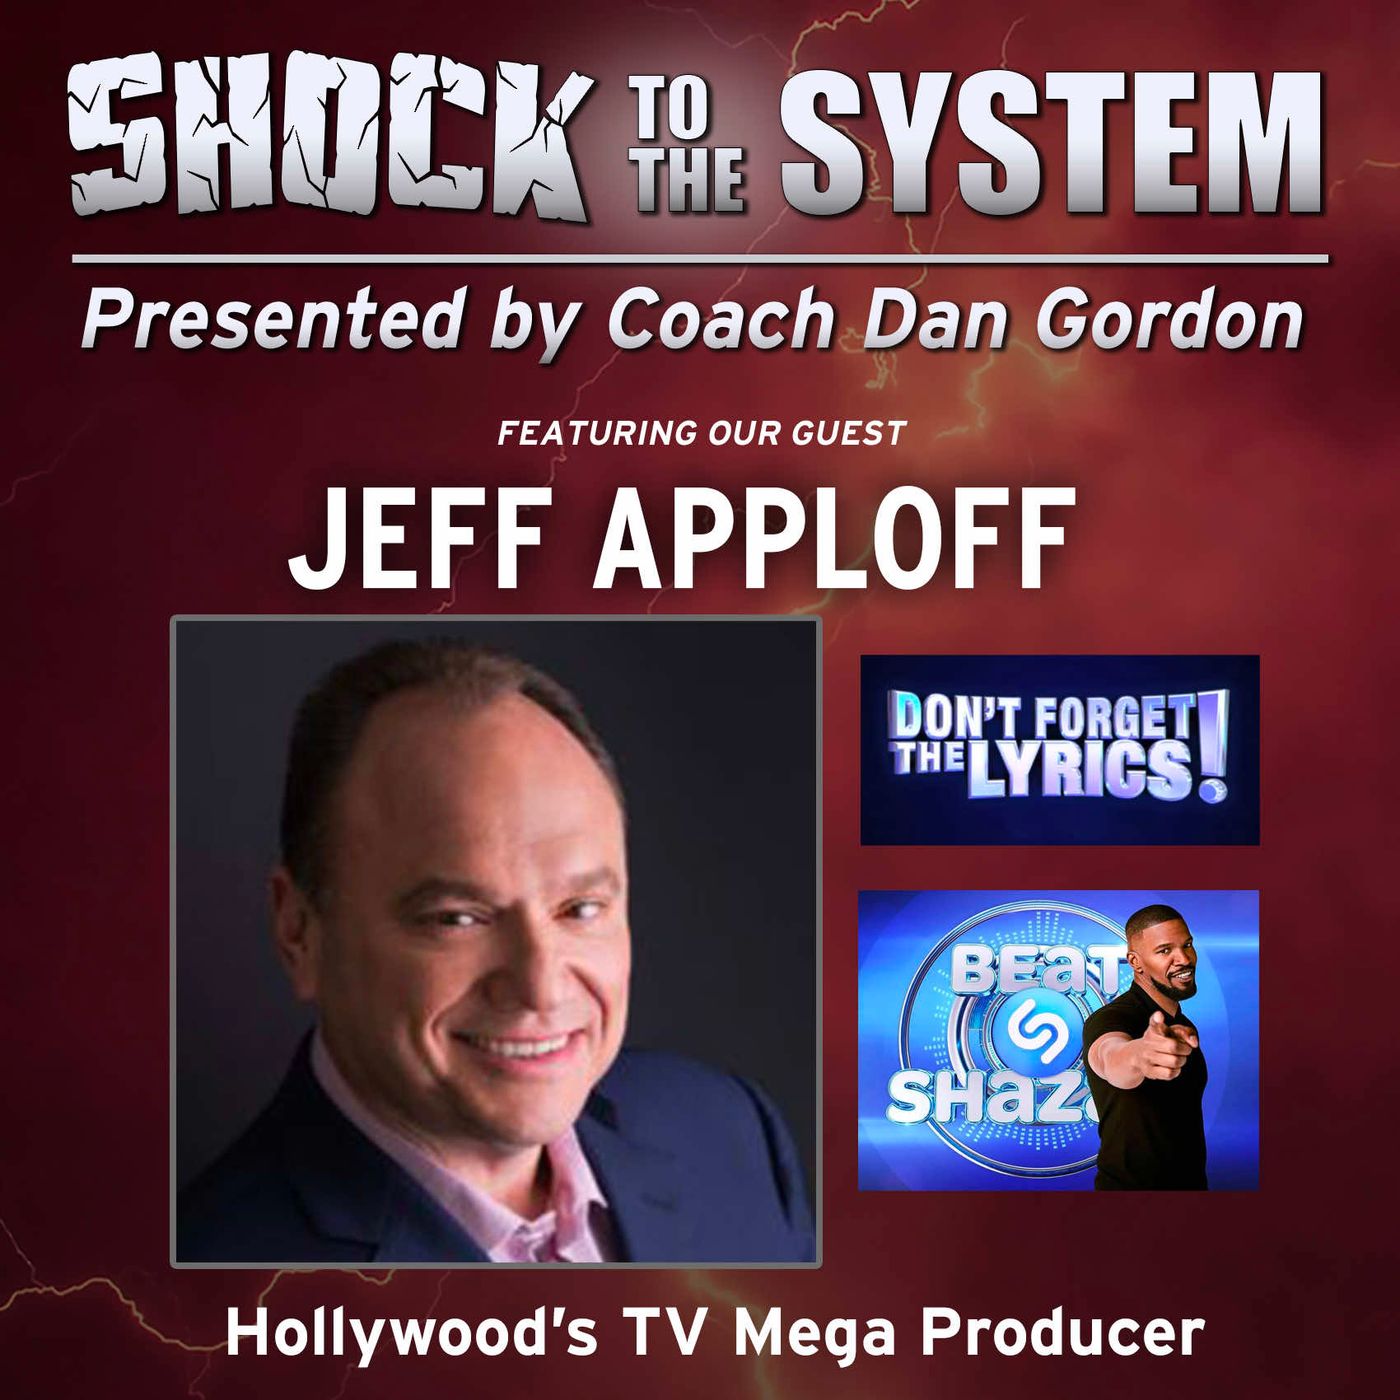 Jeff Apploff: From high school dropout to major Hollywood player and TV mega-producer!